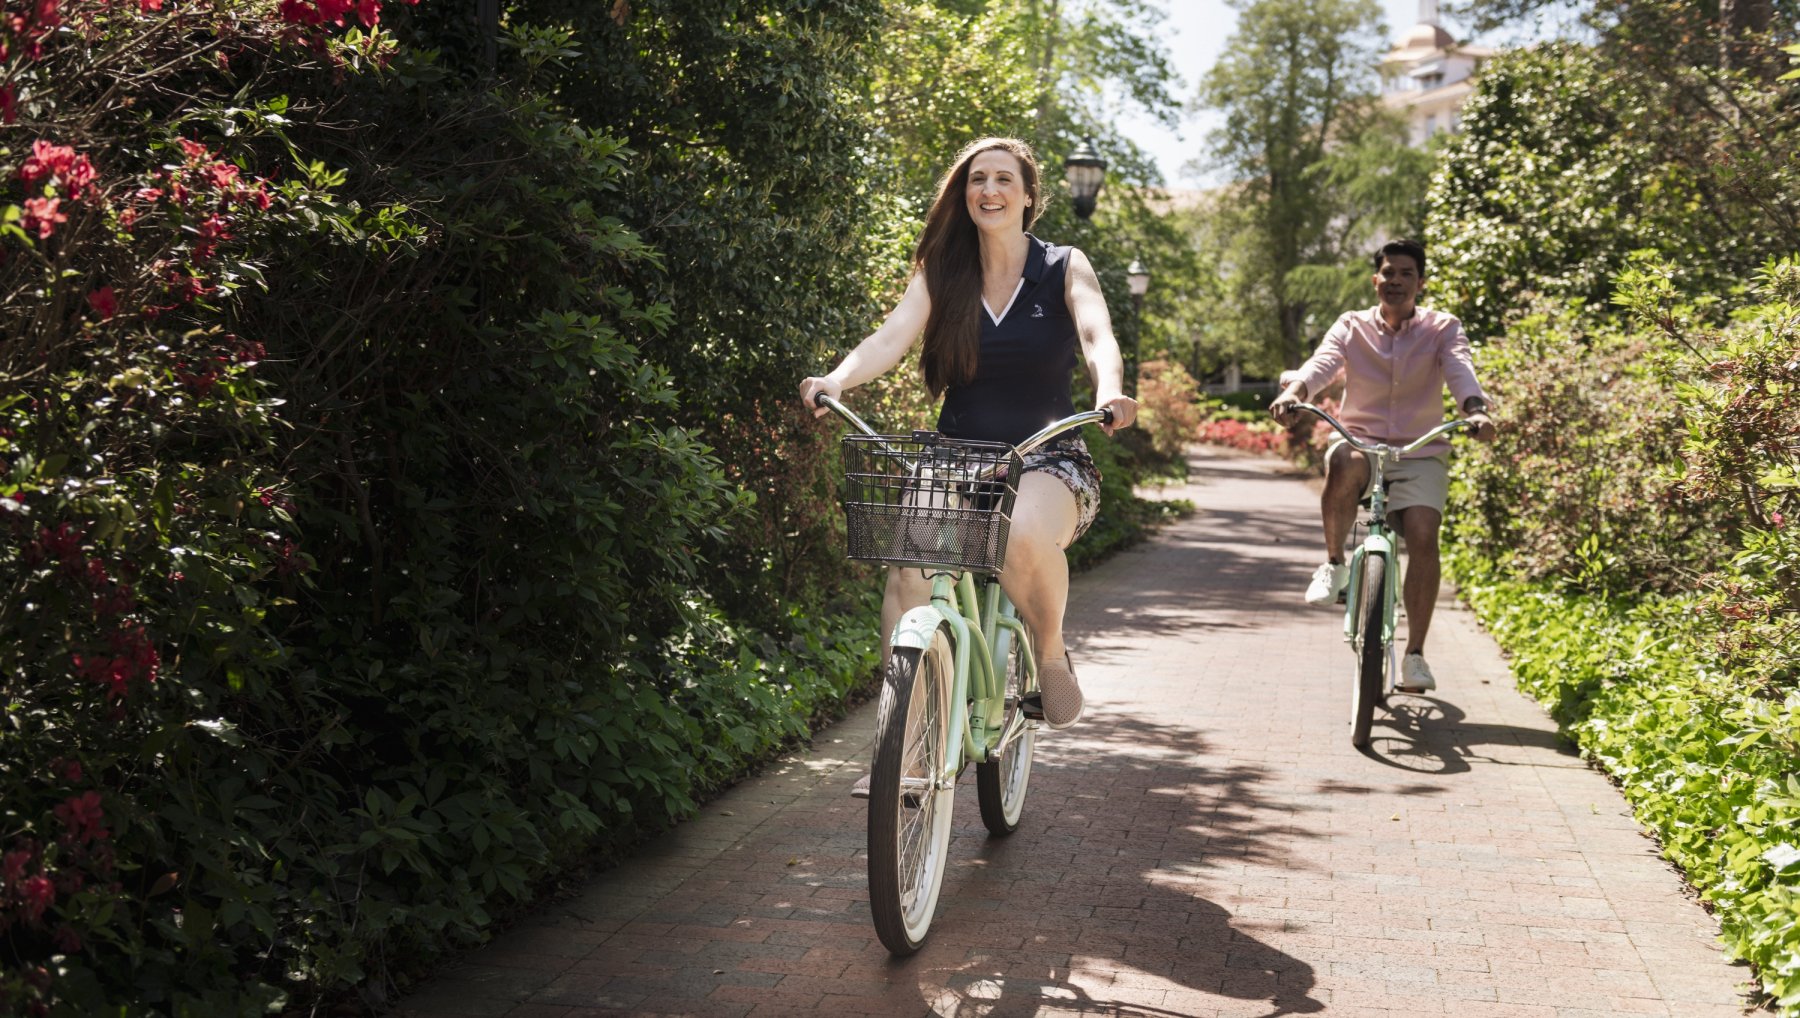 Couple riding bikes through brick path surrounded by trees and flowers